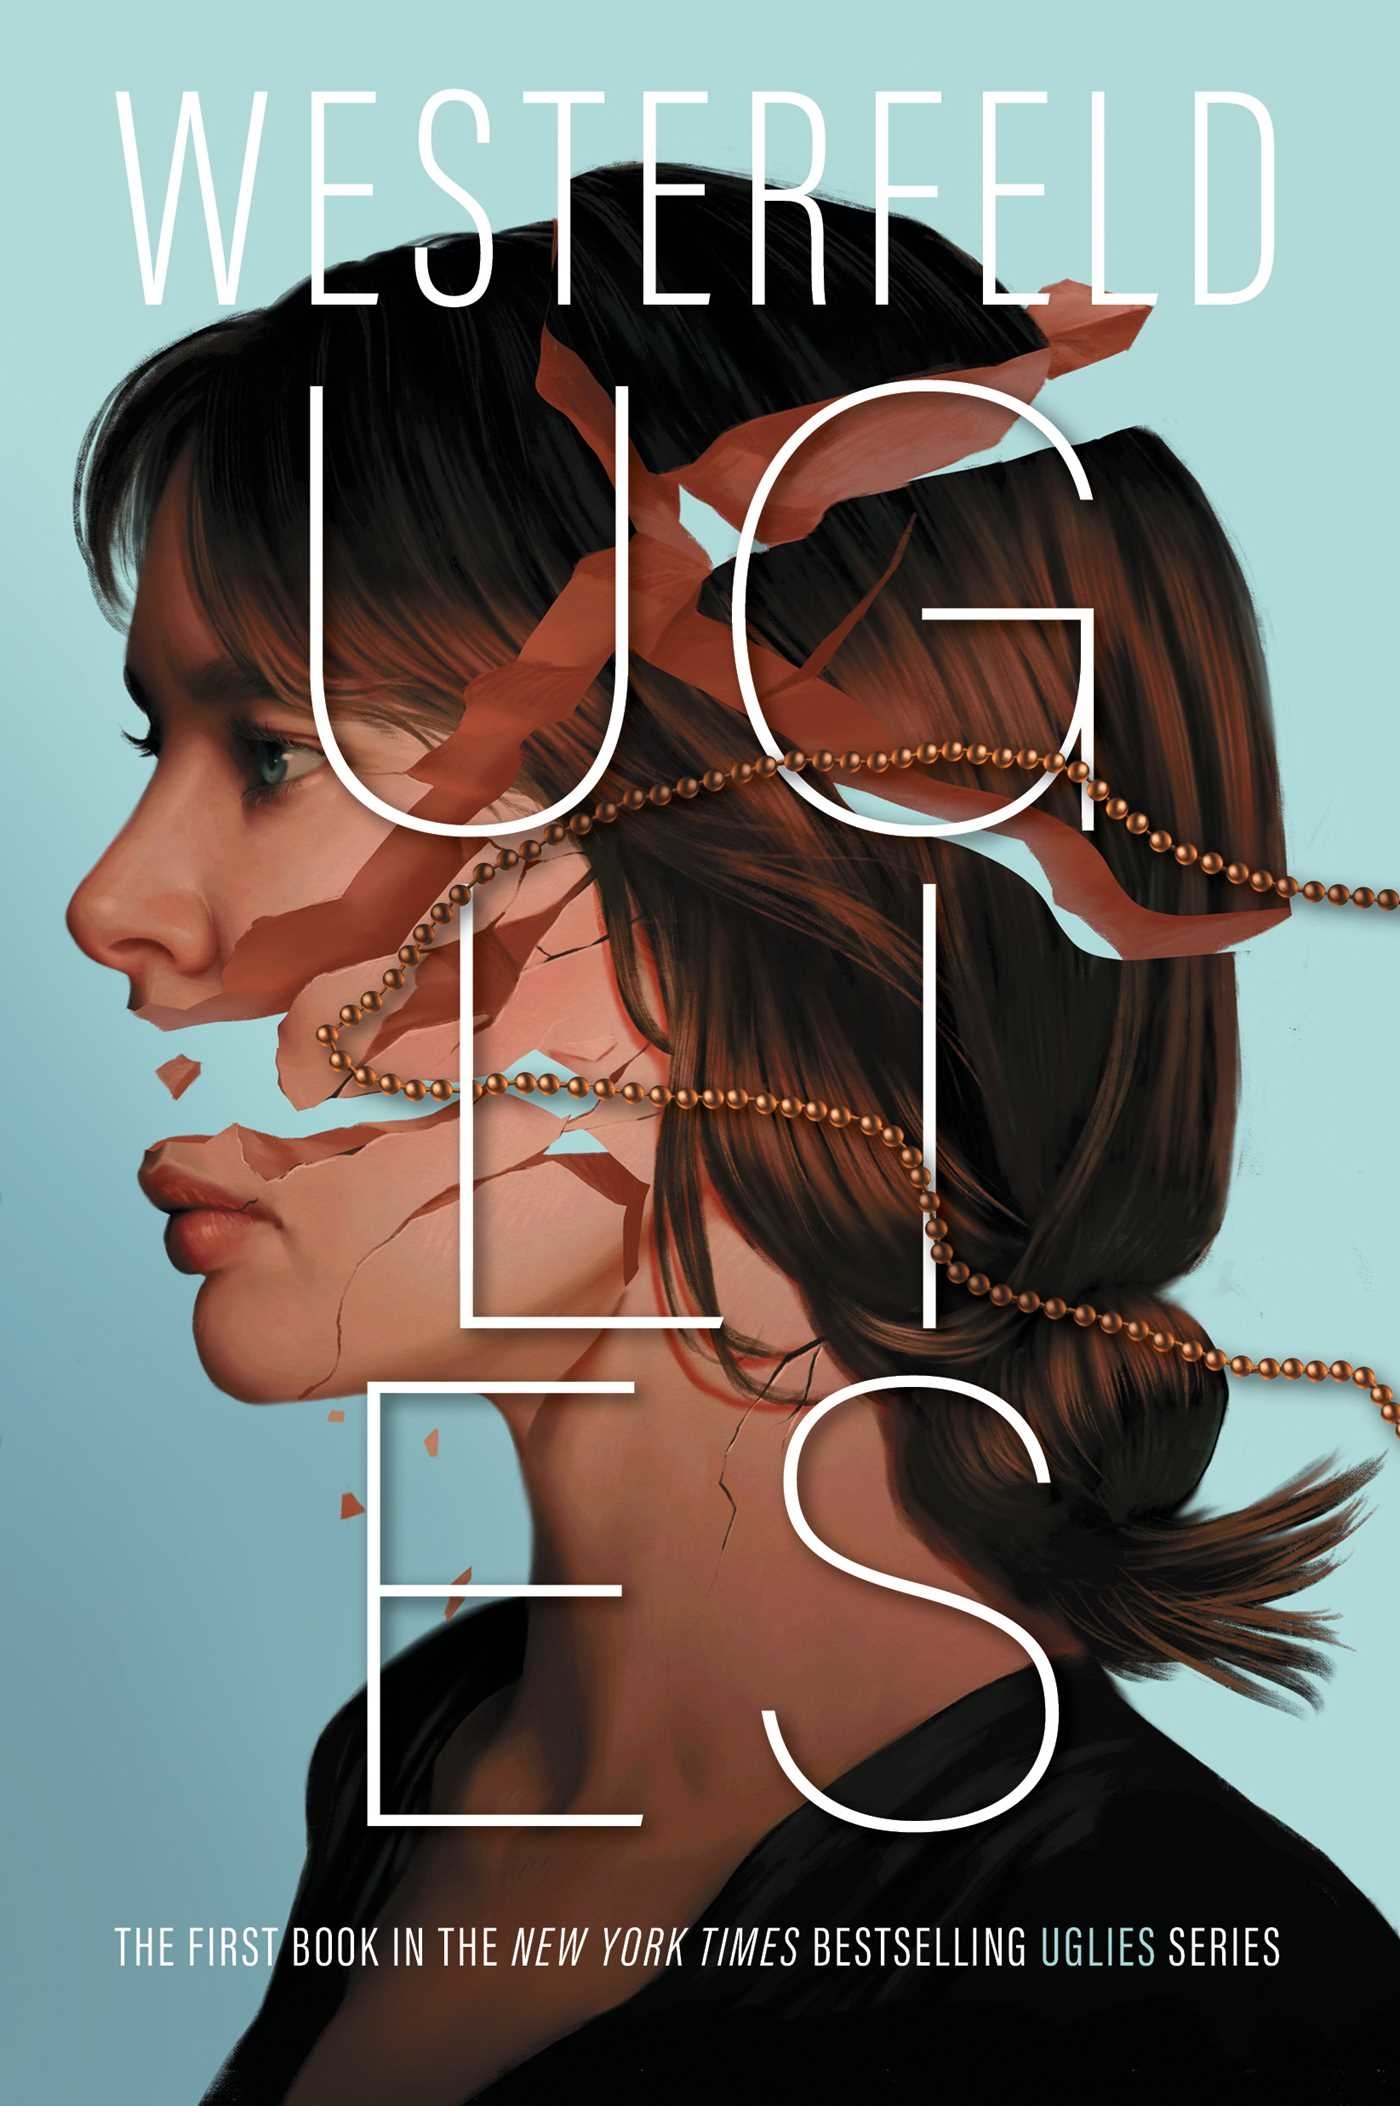 Cover of &quot;Uglies&quot; by Westerfeld showing a fragmented profile of a girl&#x27;s face with text overlay